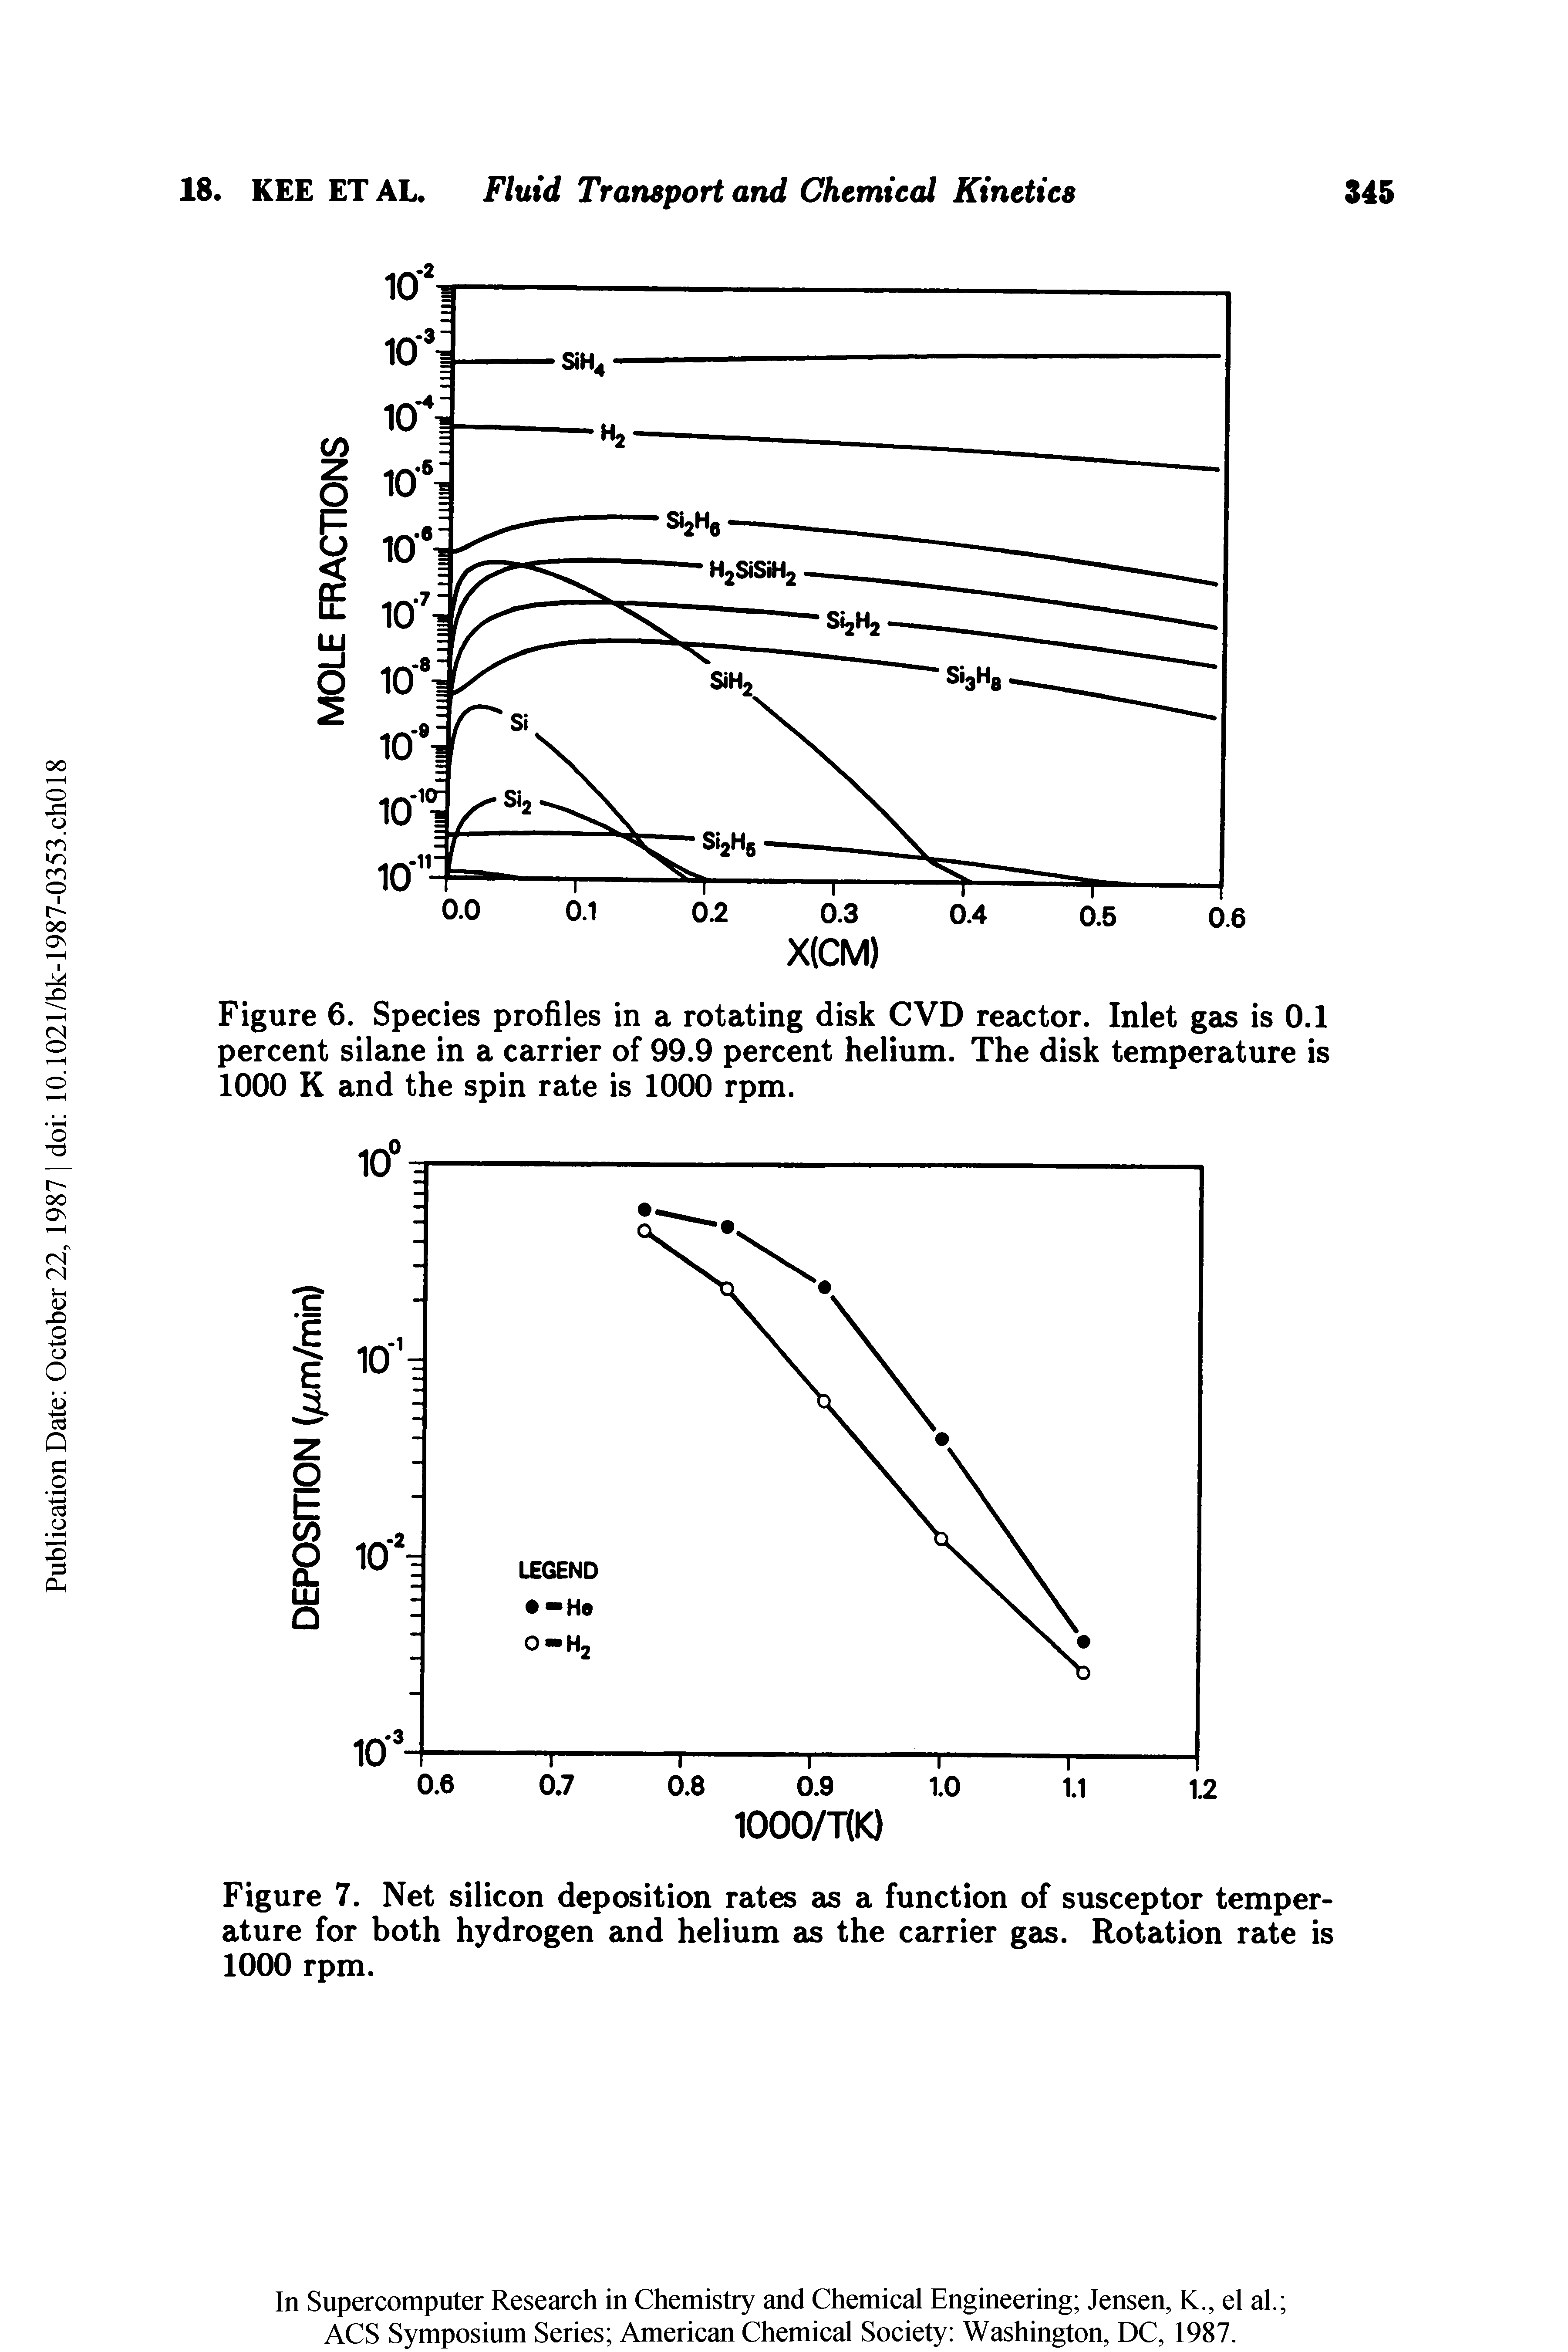 Figure 7. Net silicon deposition rates as a function of susceptor temperature for both hydrogen and helium as the carrier gas. Rotation rate is 1000 rpm.